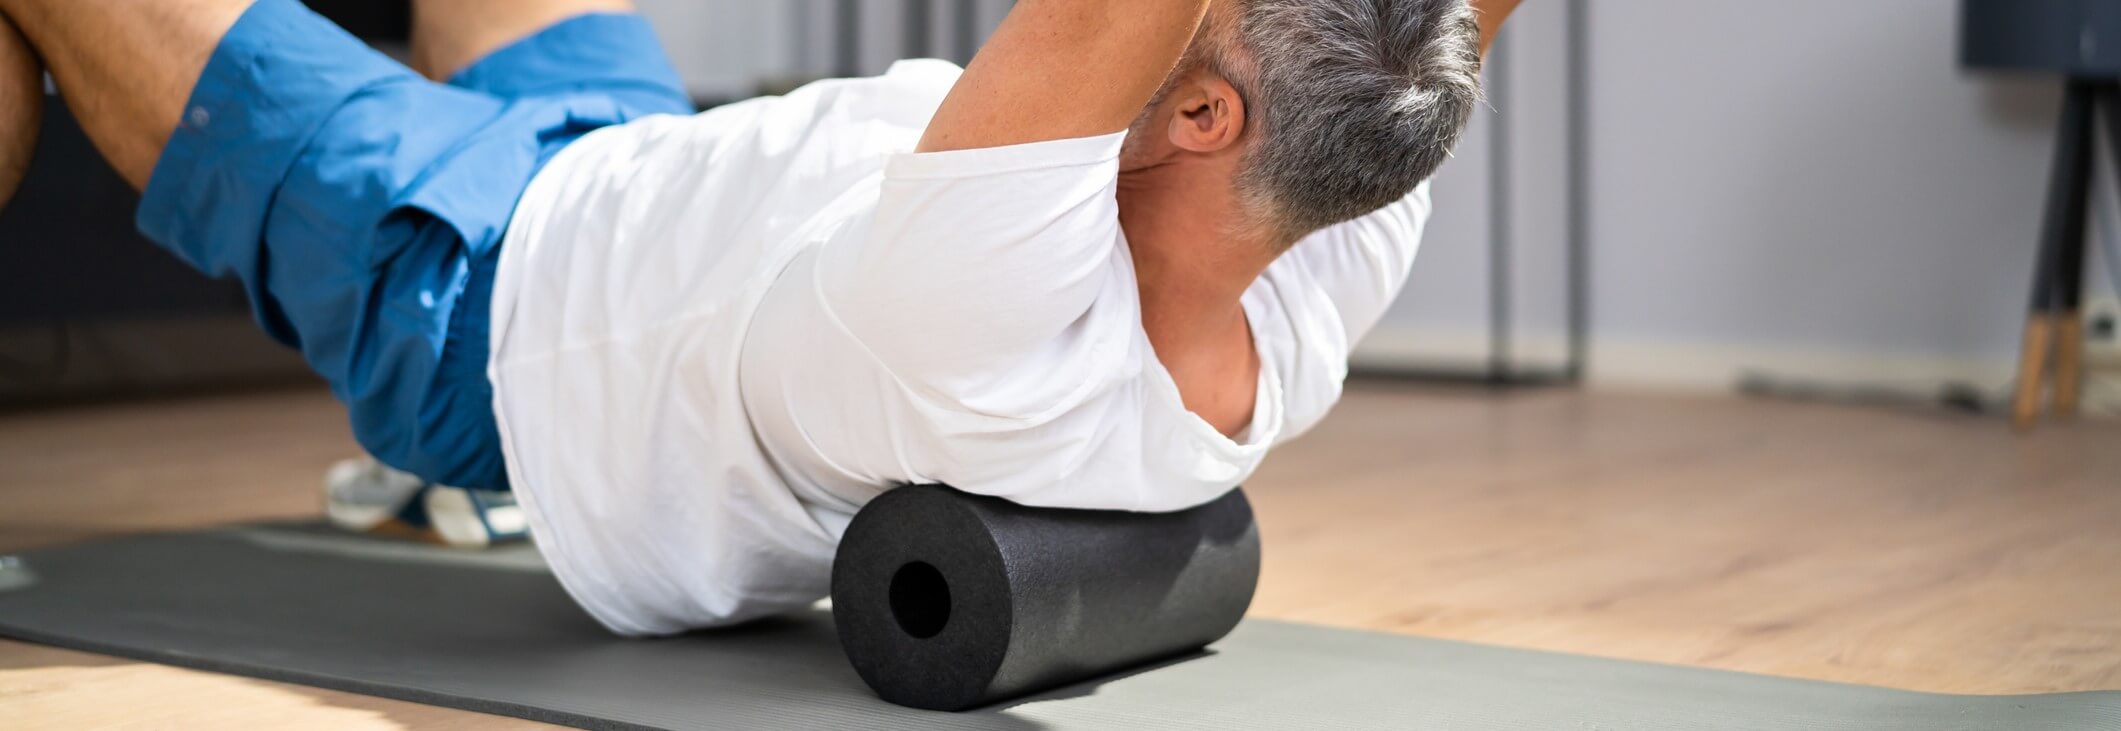 Young mascular man massaging his upper back with a foam roller